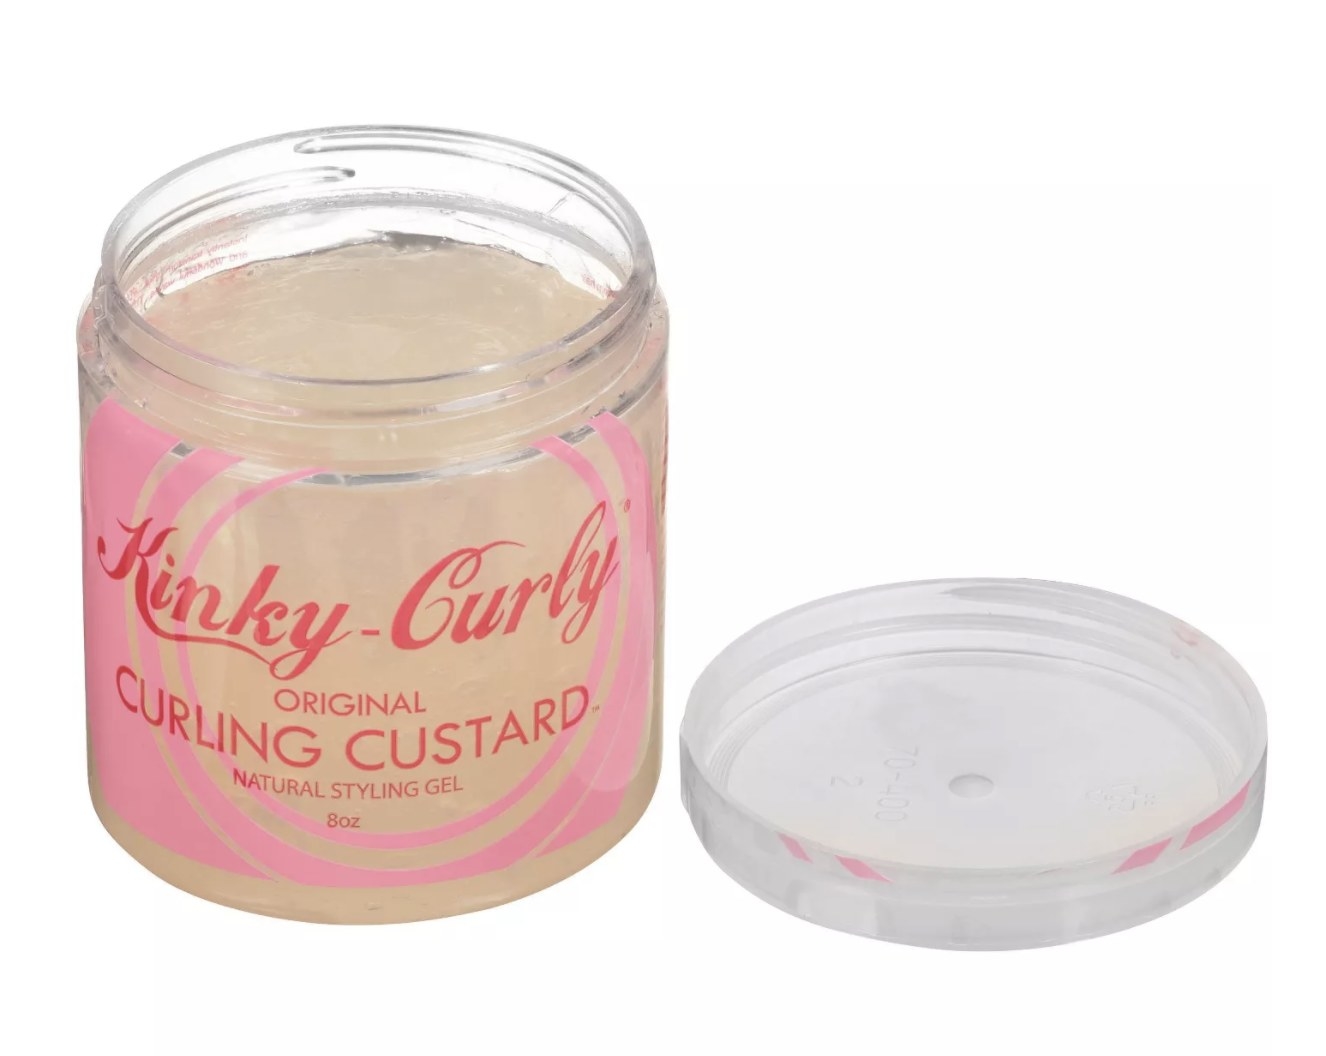 The clear container is filled with a  yellow-tinted custard and has a pink and red design that says &quot;KIKY-CURLY&quot; in a script font